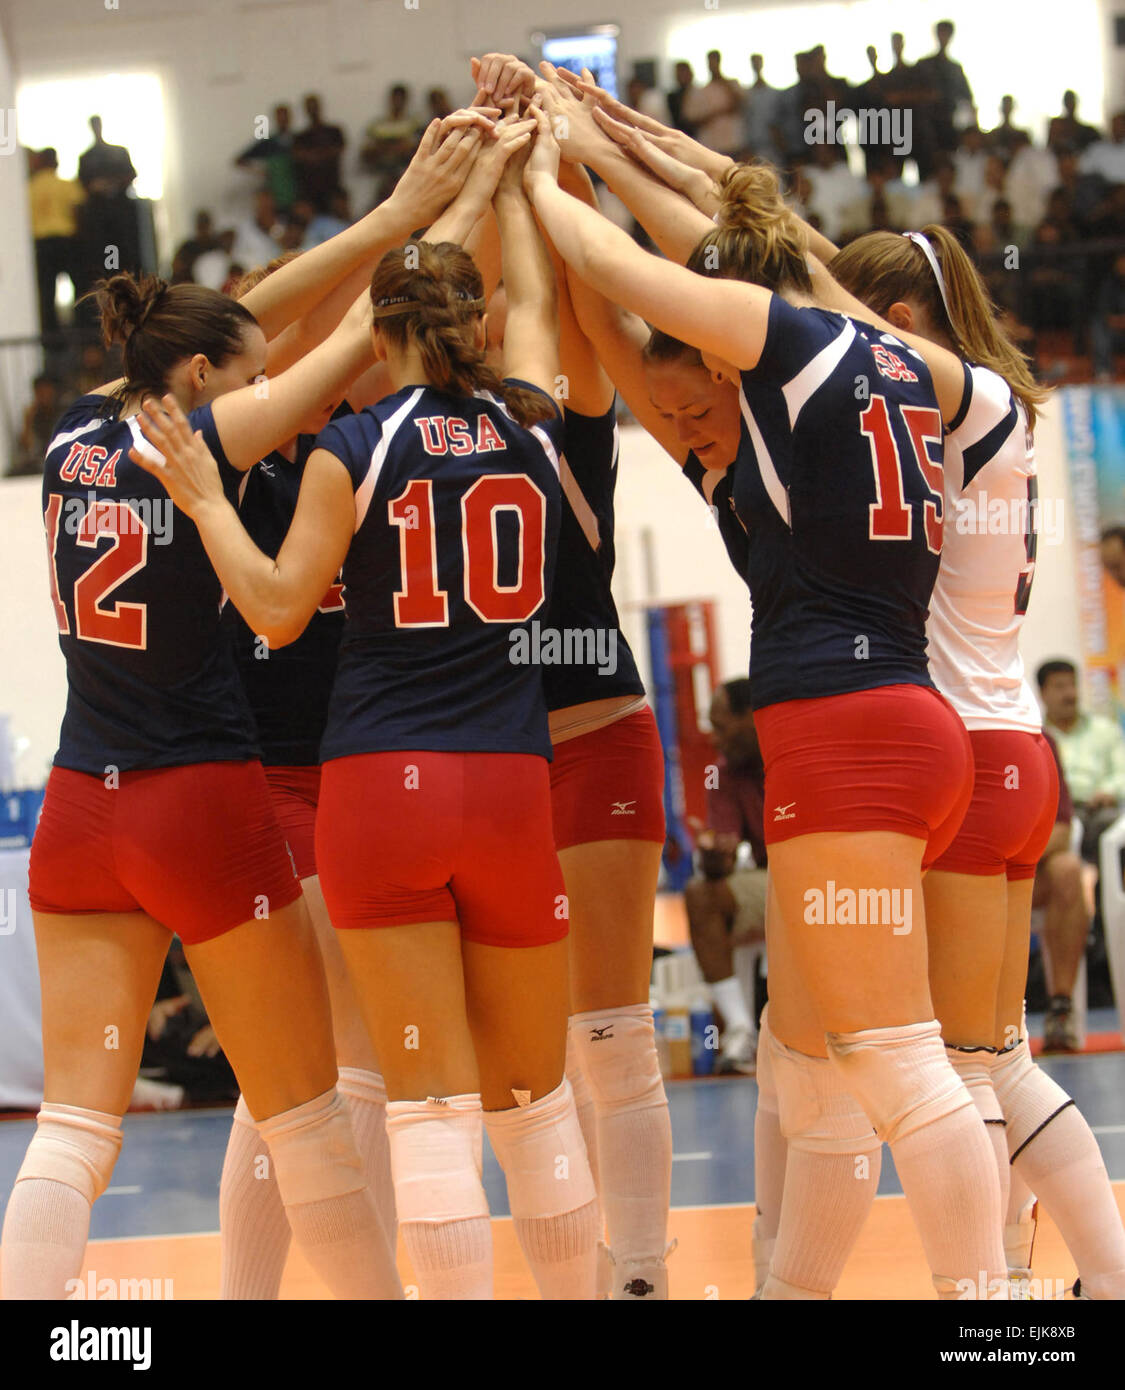 India 18 Oct. 2007 - The U.S. Womens Volleyball team huddles together during a match against the Netherlands at the 4th Conseil Internationale du Sport Militaire’s CISM Military World Games in Hyderabad, India.  The U.S. went on to win in three games, 25-14, 25-16, 25-18.  The Conseil Internationale du Sport Militaire’s CISM Military World Games is the largest international military Olympic-style event in the world. In this year’s fourth edition of the Games, 103 countries and more than 5,000 athletes are scheduled to compete Oct. 14-21 in boxing, diving, football soccer, handball, judo, milit Stock Photo